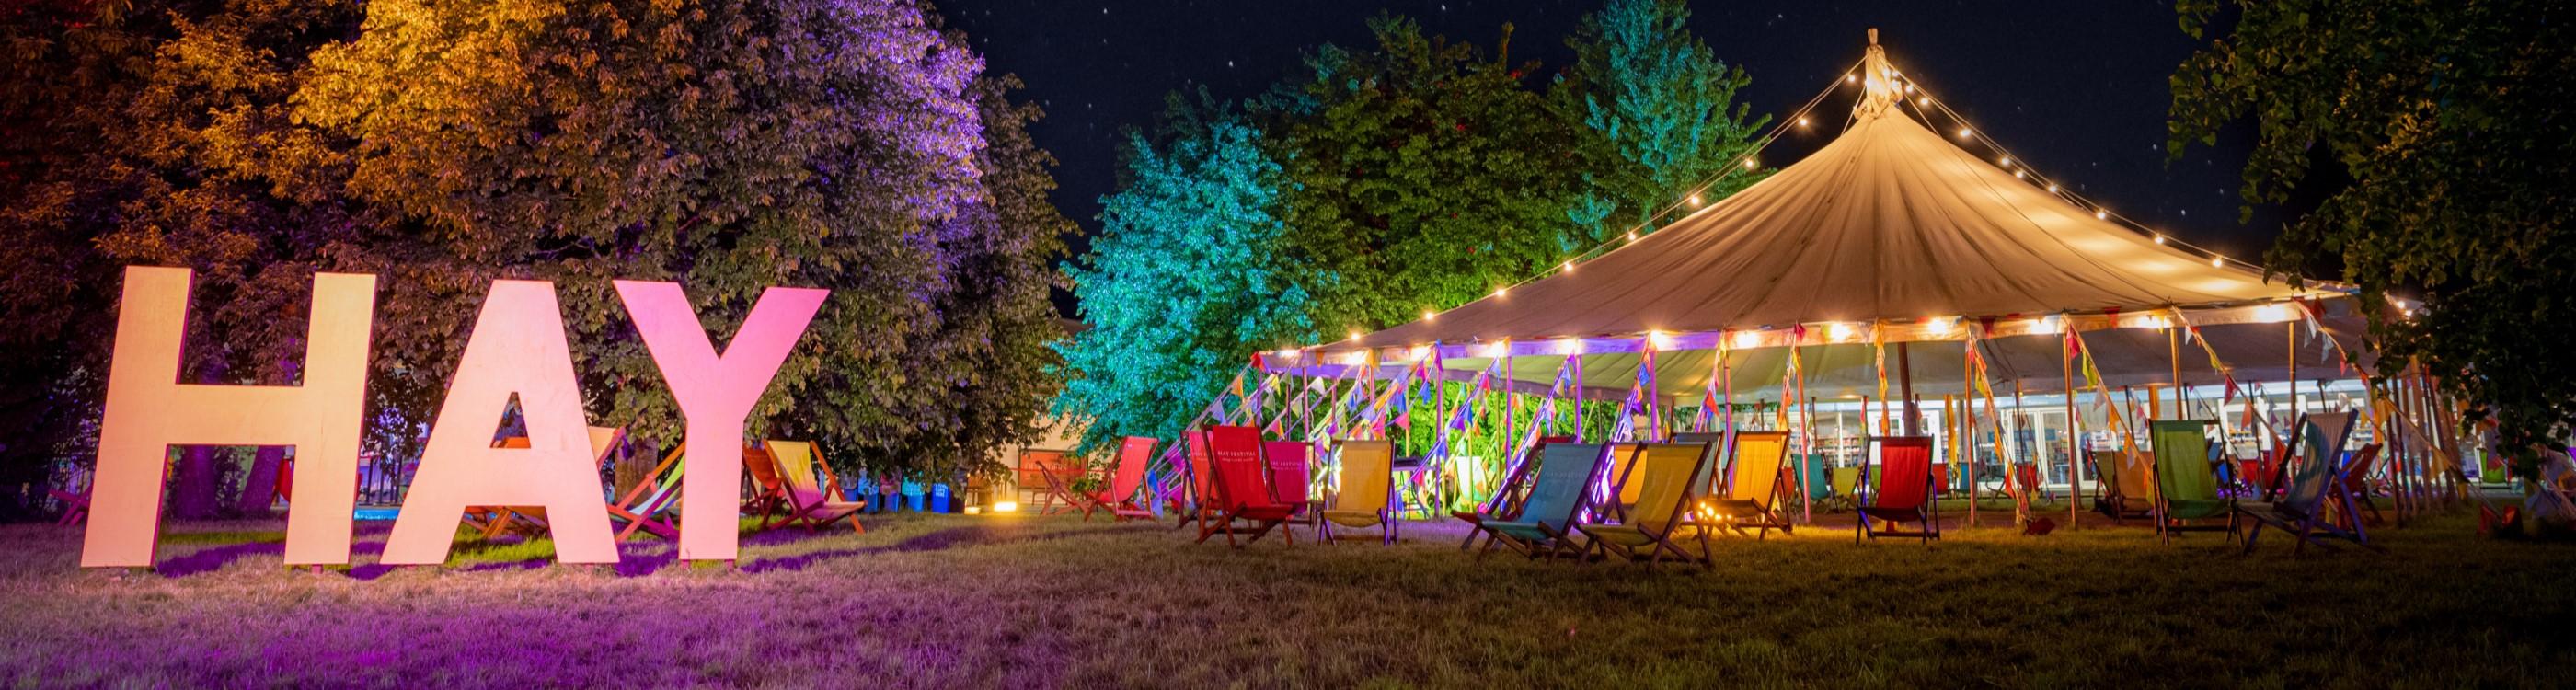 An illuminated tent with empty colourful deck chairs outside, at night, with a sign saying 'Hay', at Hay Festival.